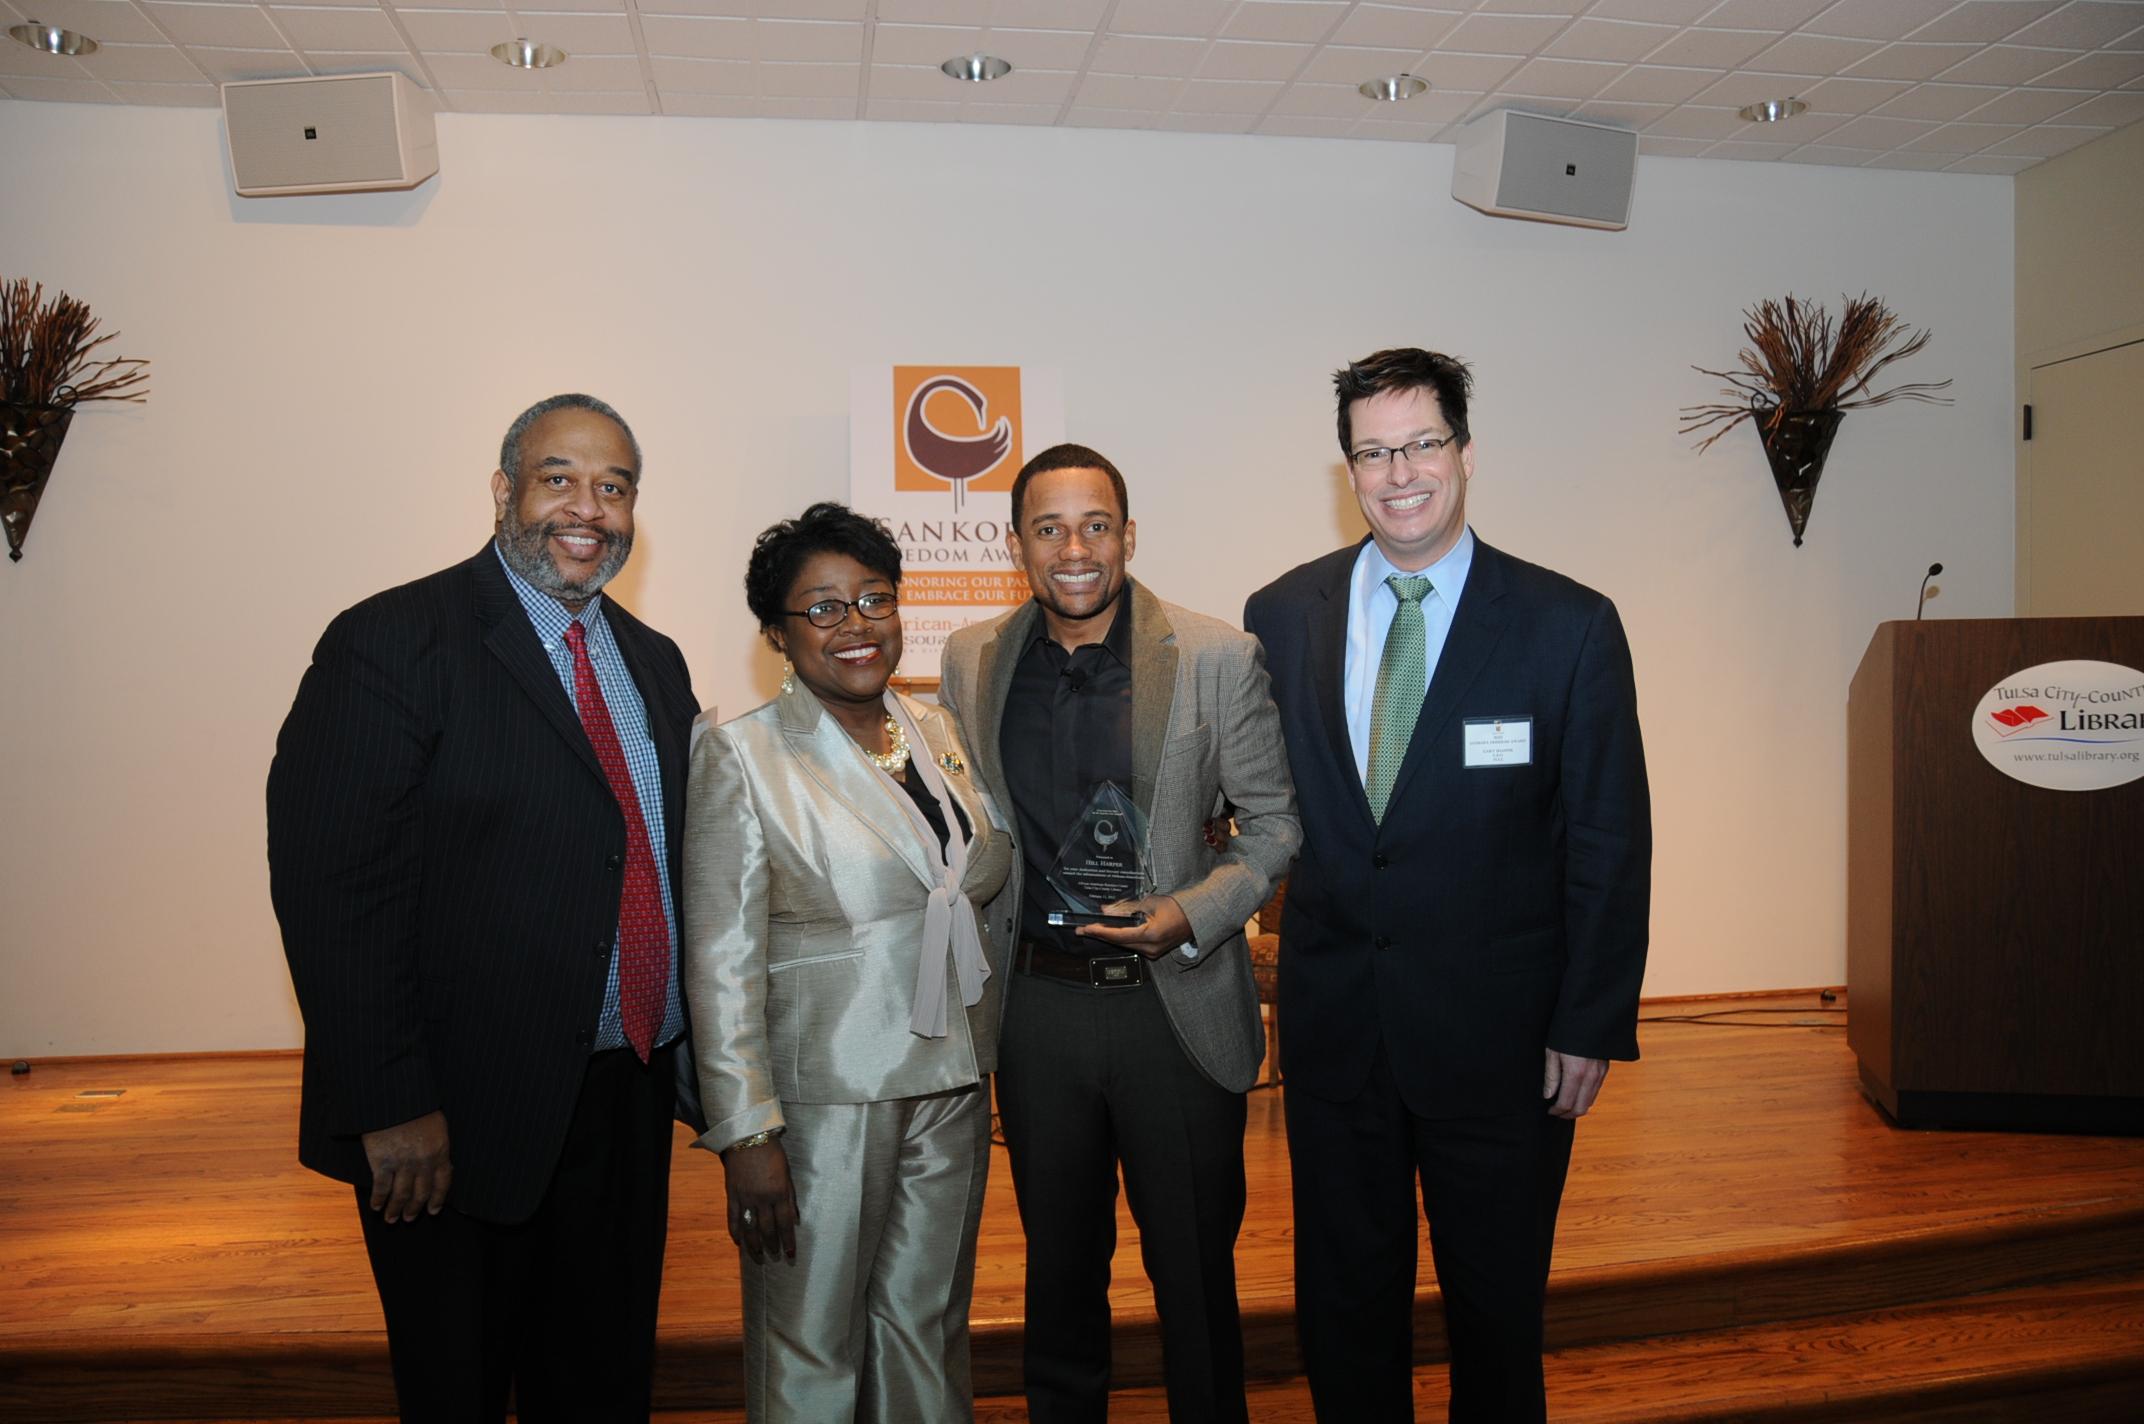 4 people standing together, one holding the Sankofa Award